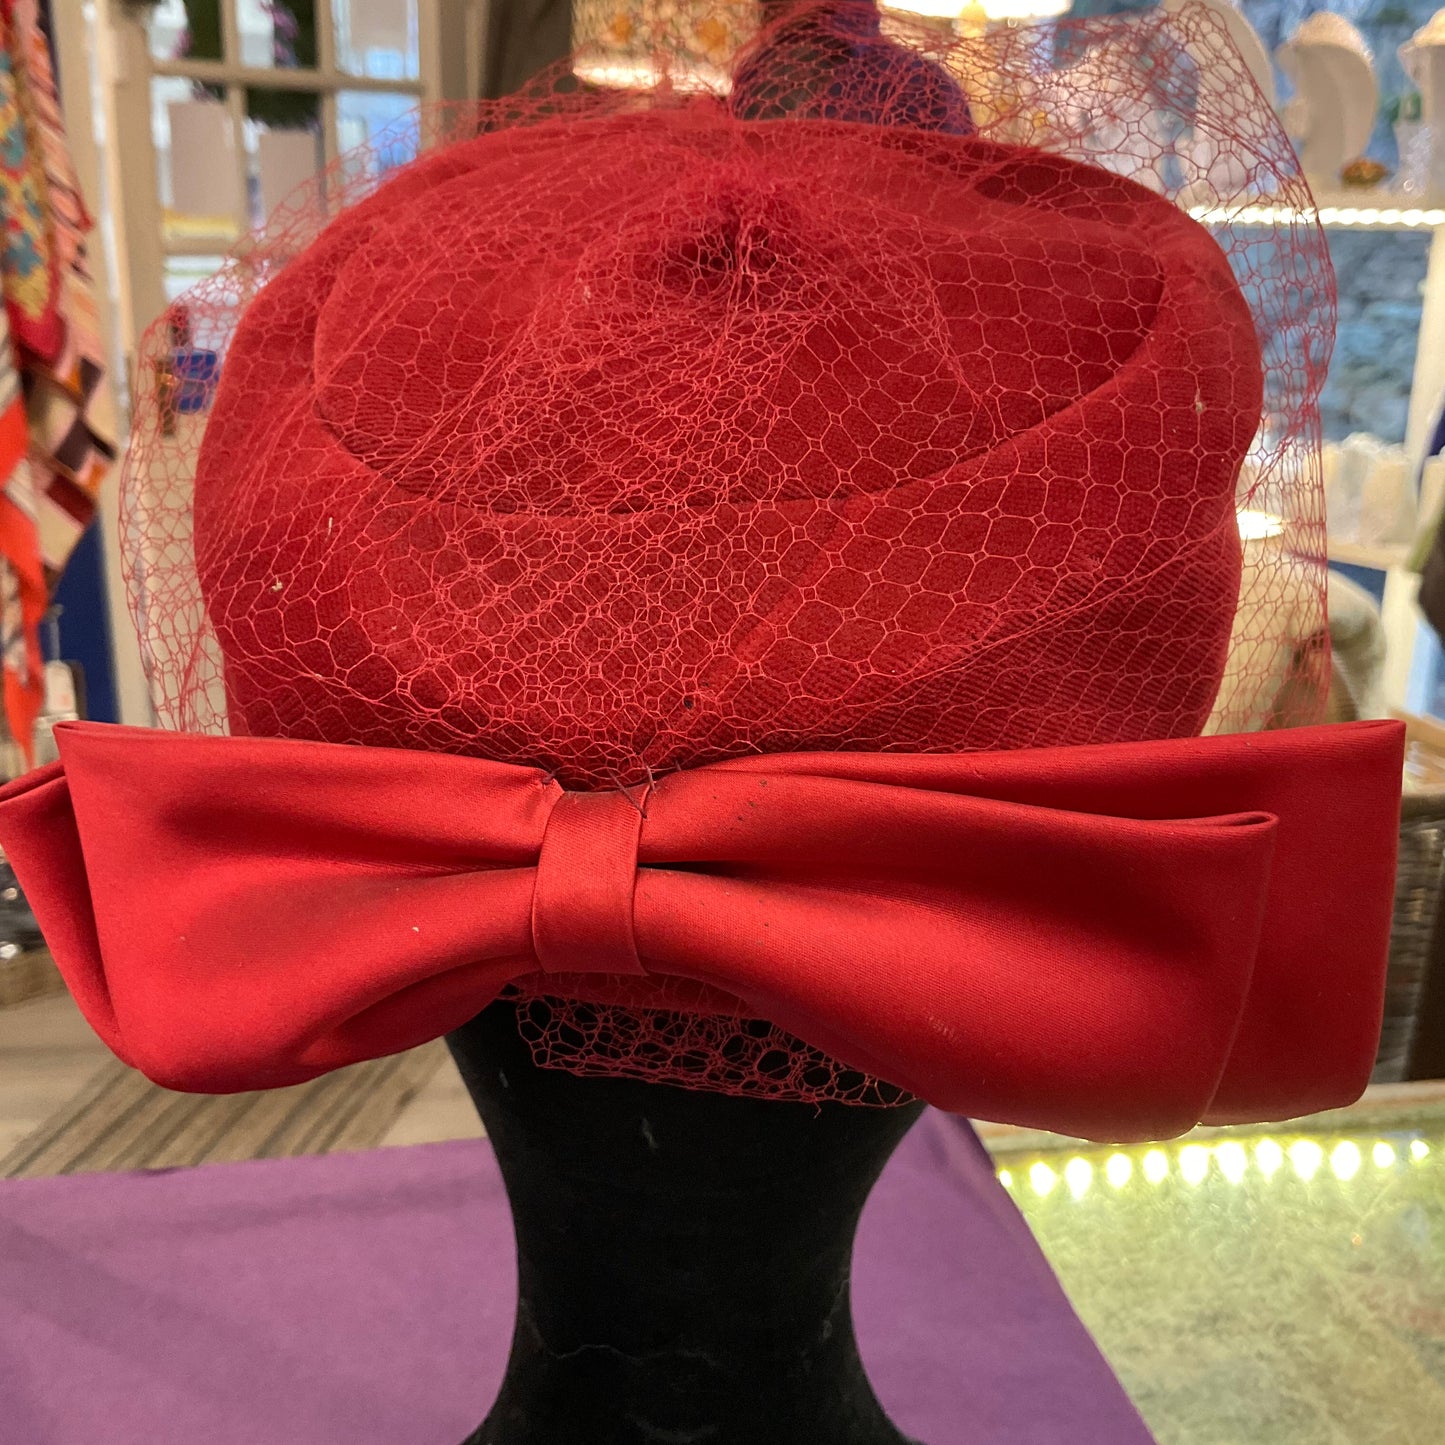 Vintage 1980s Red Velvet pill box Hat with net veil and satin bow. Wedding